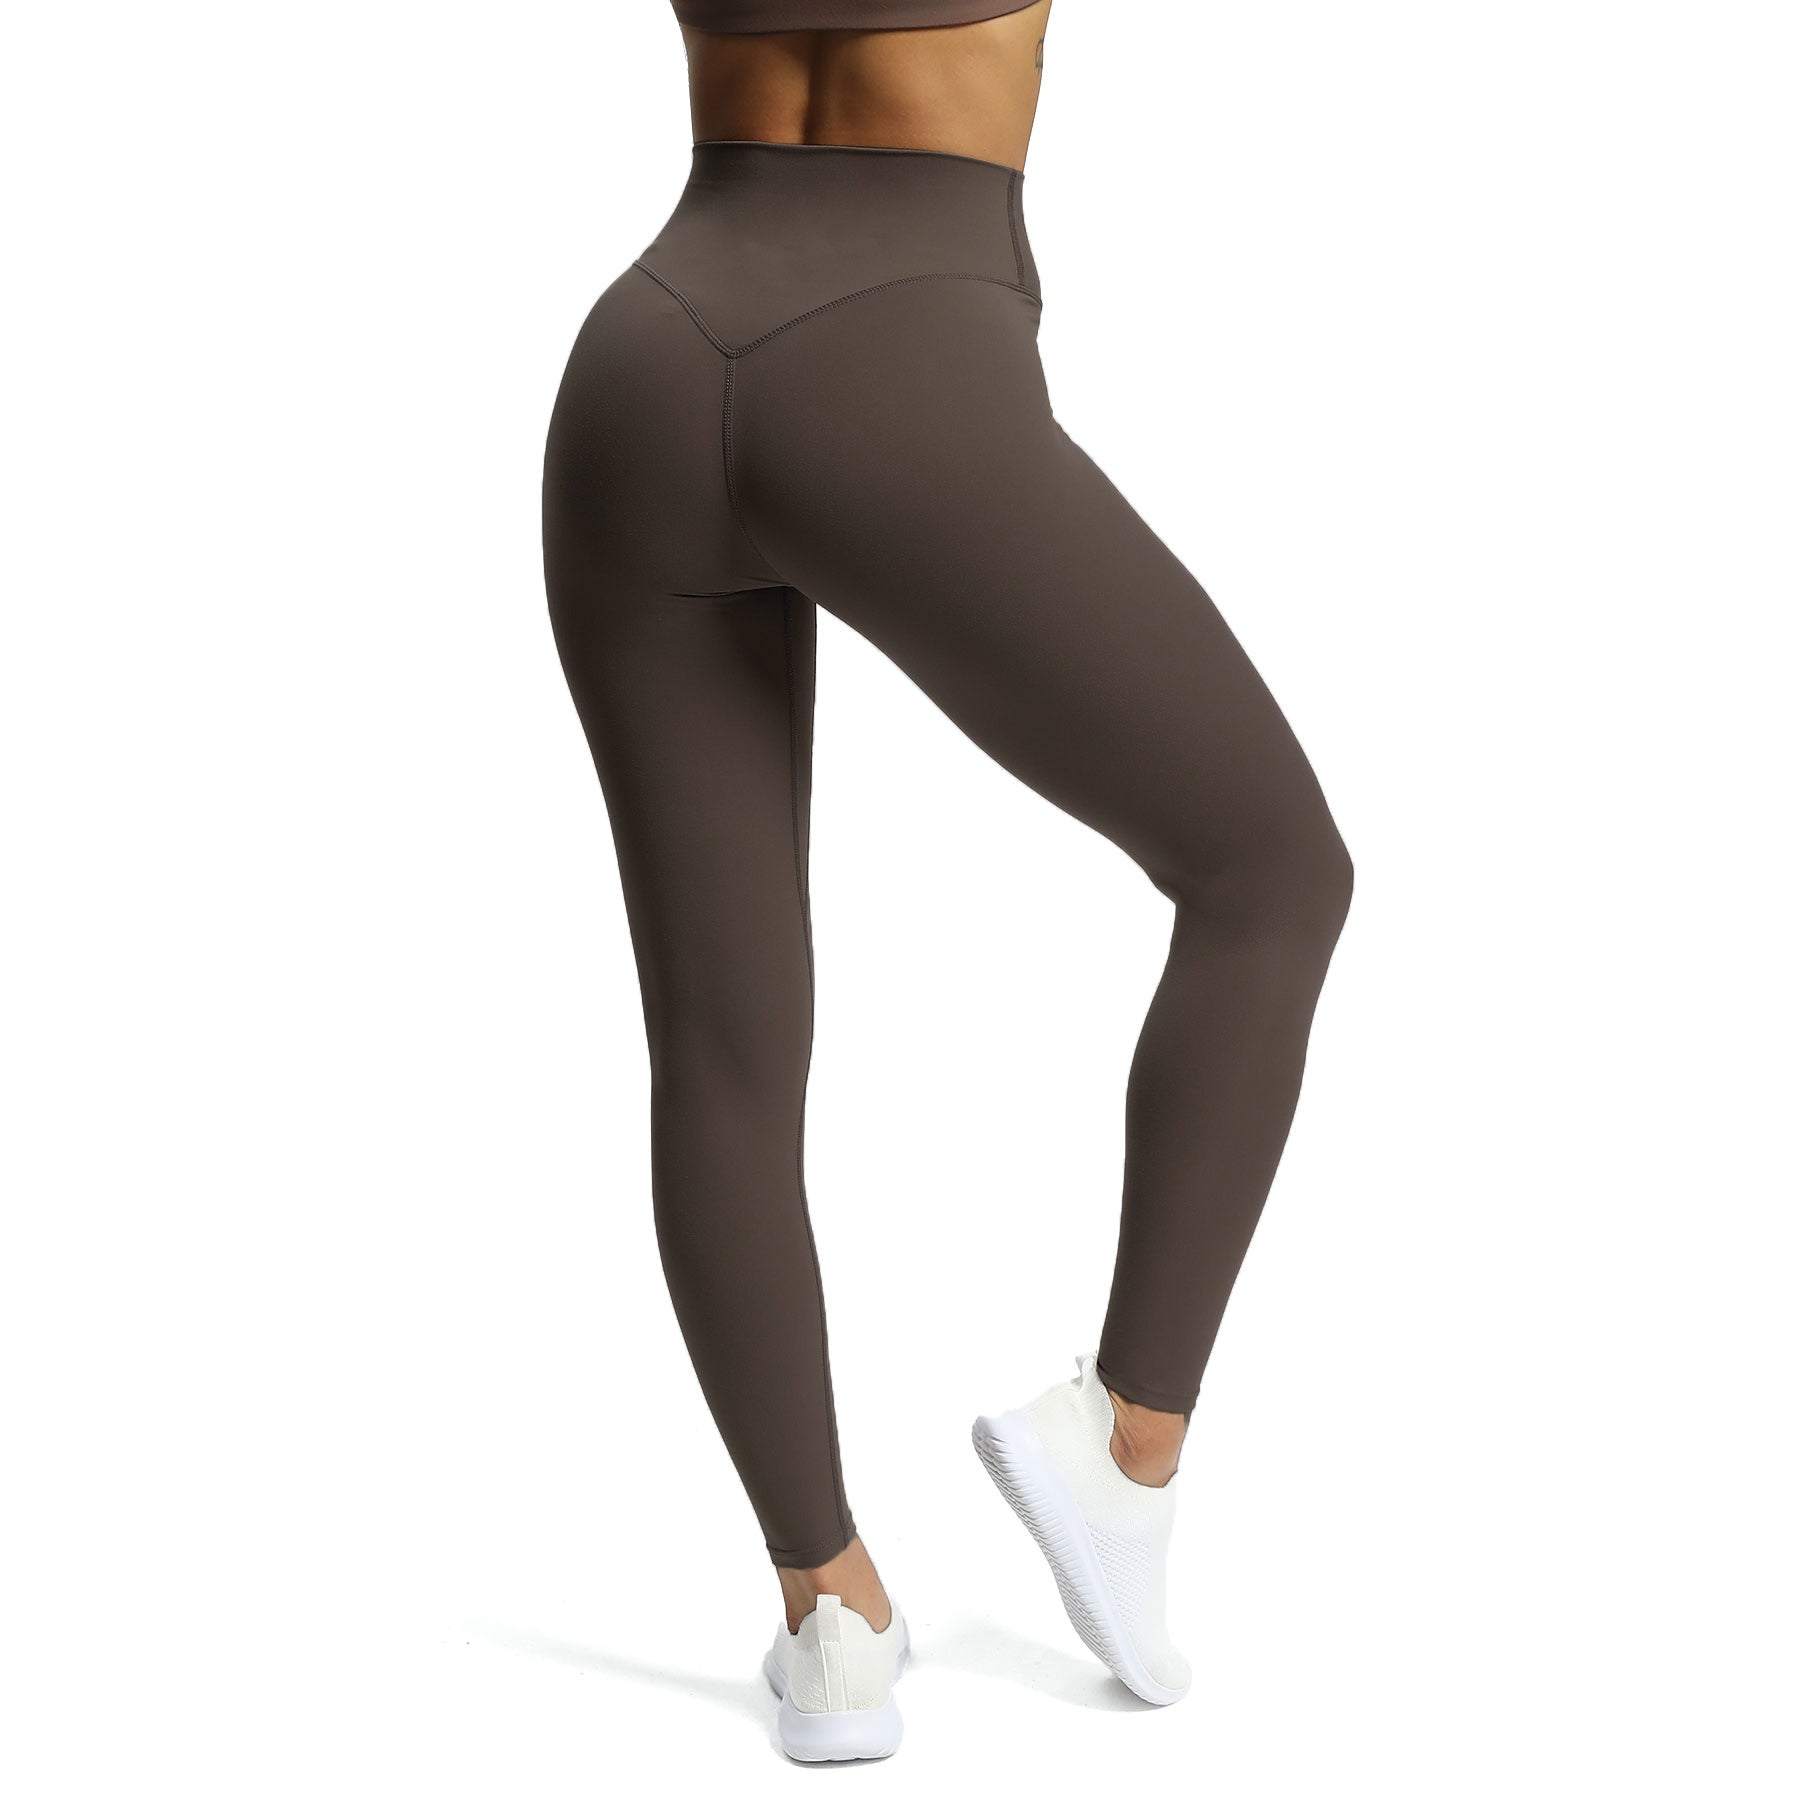 High Waisted V Shape Yoga Leggings With Align Sequins Printed Seamless Gym  Pants For Fitness CK1262 From Victor_wong, $18.8 | DHgate.Com